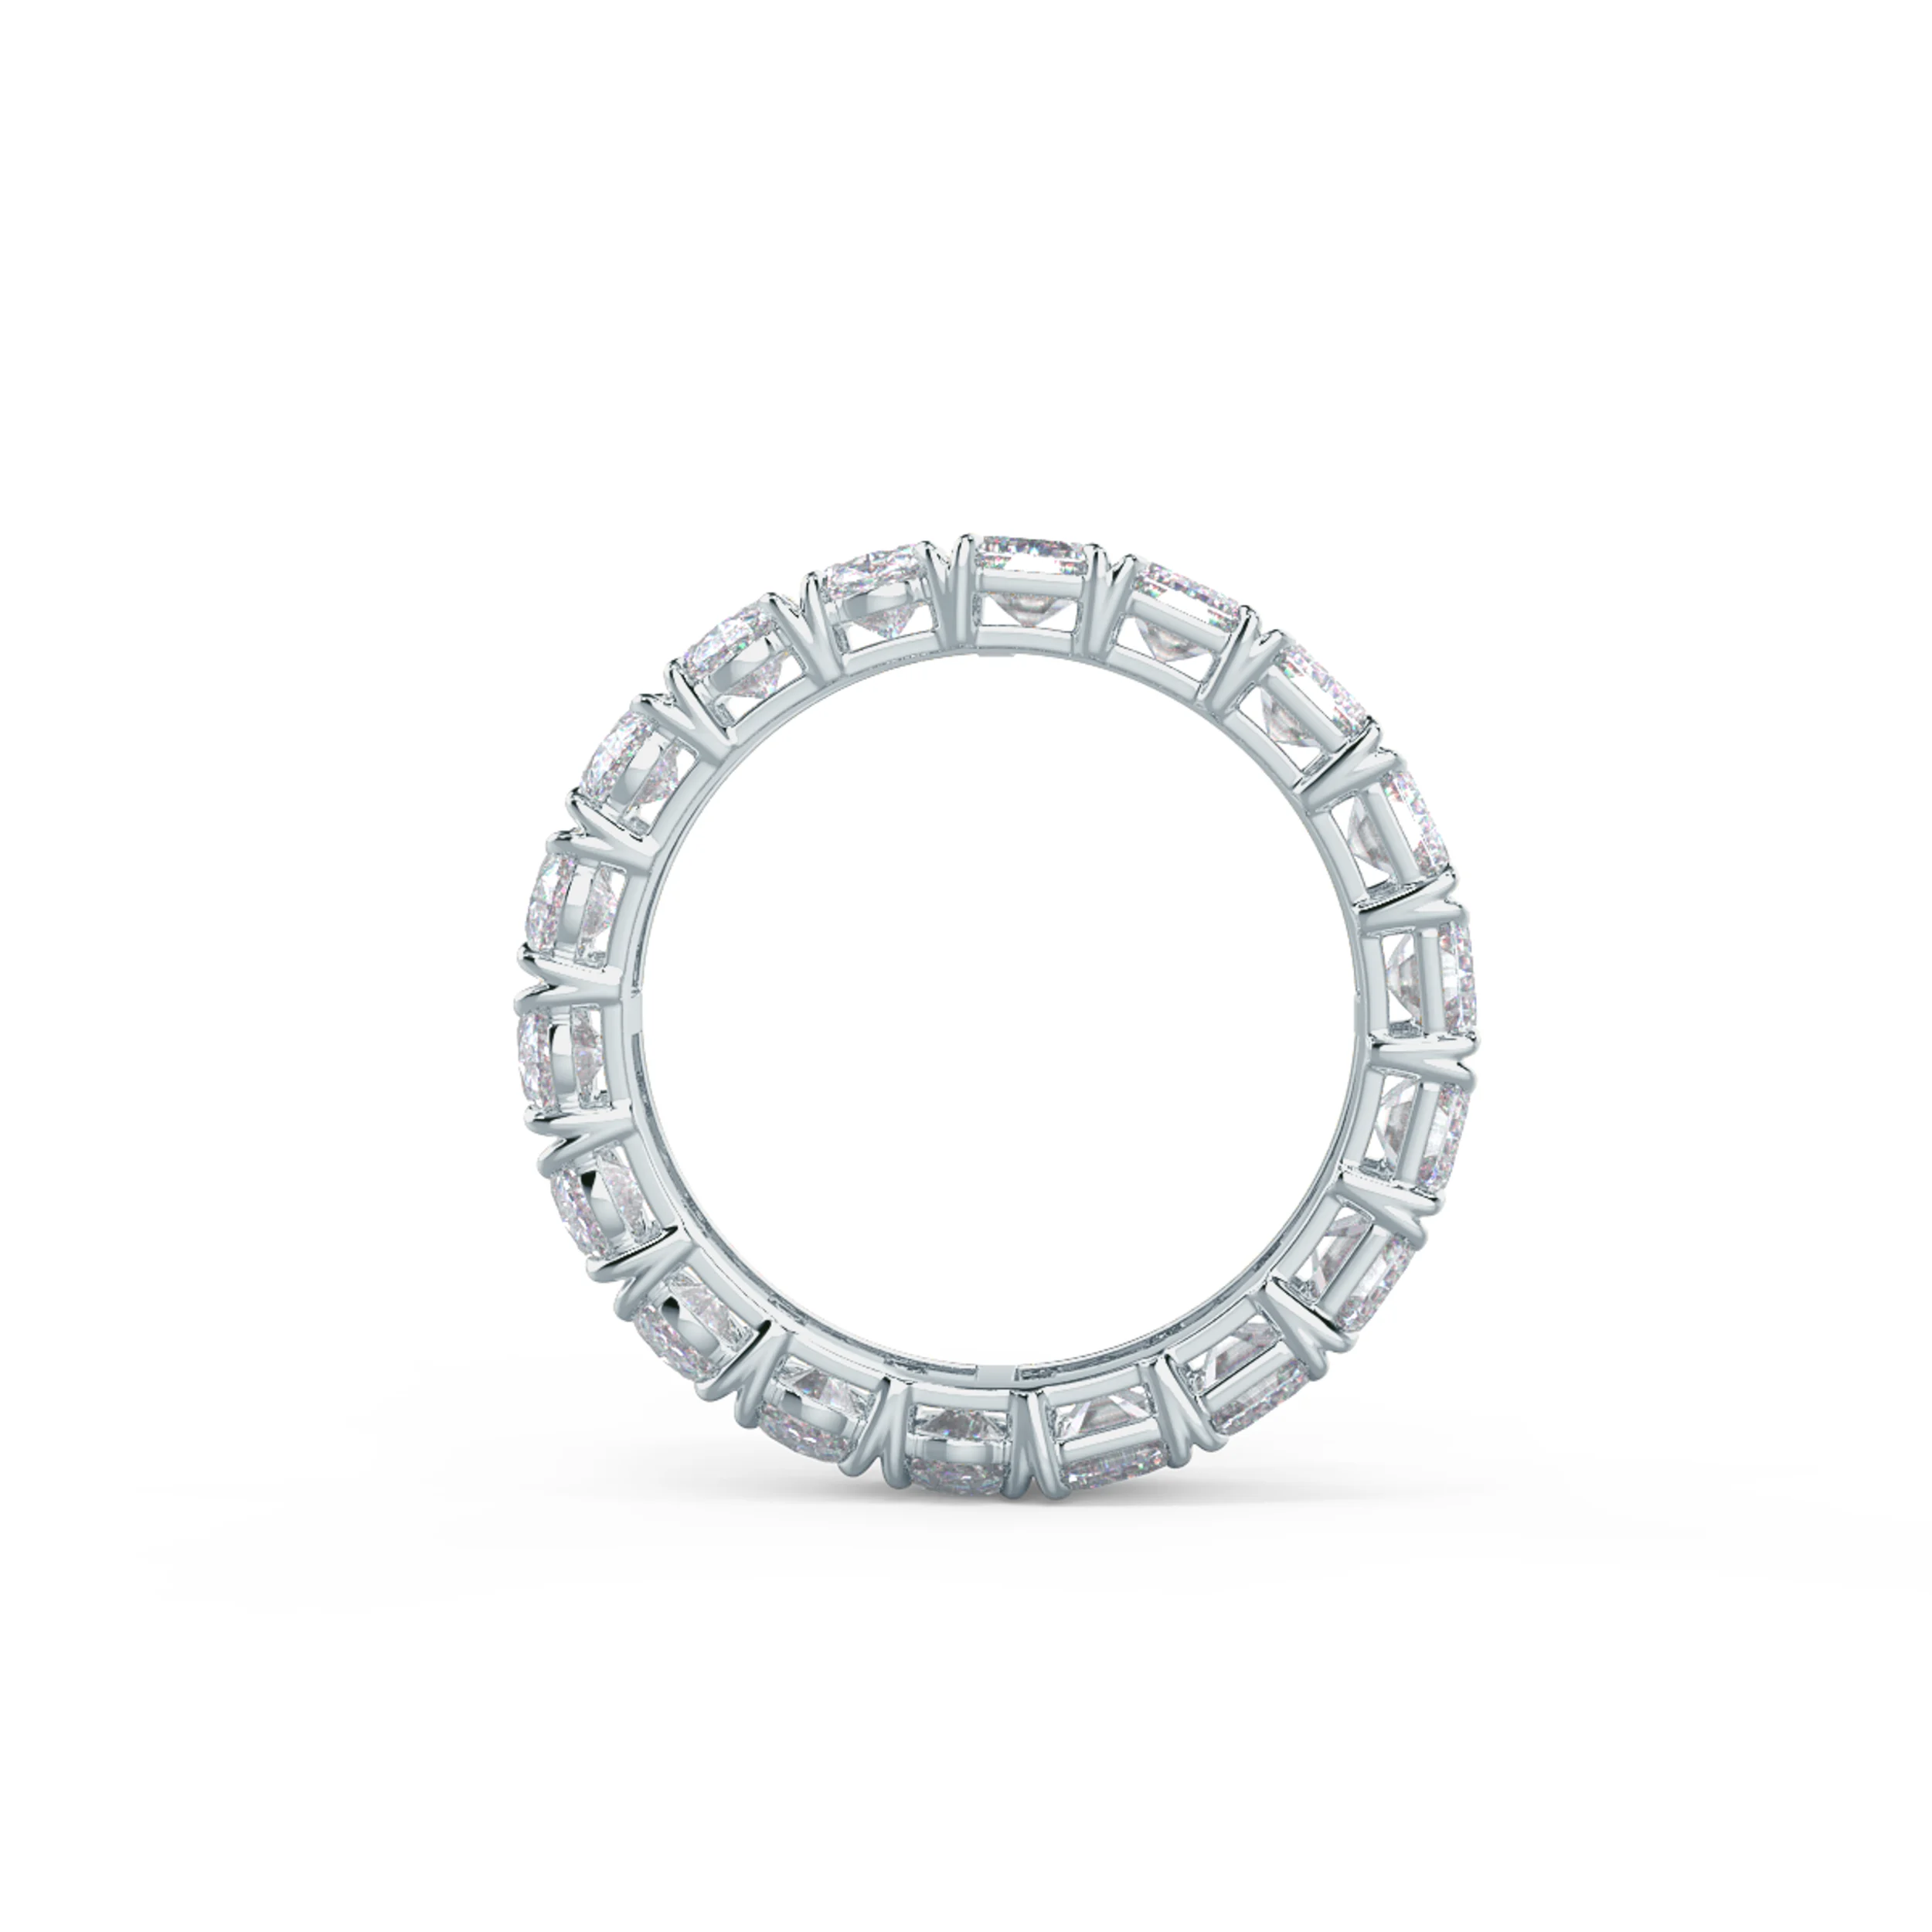 18kt White Gold Half and Half Band featuring Hand Selected 6.3 Carat Synthetic Diamonds (Profile View)